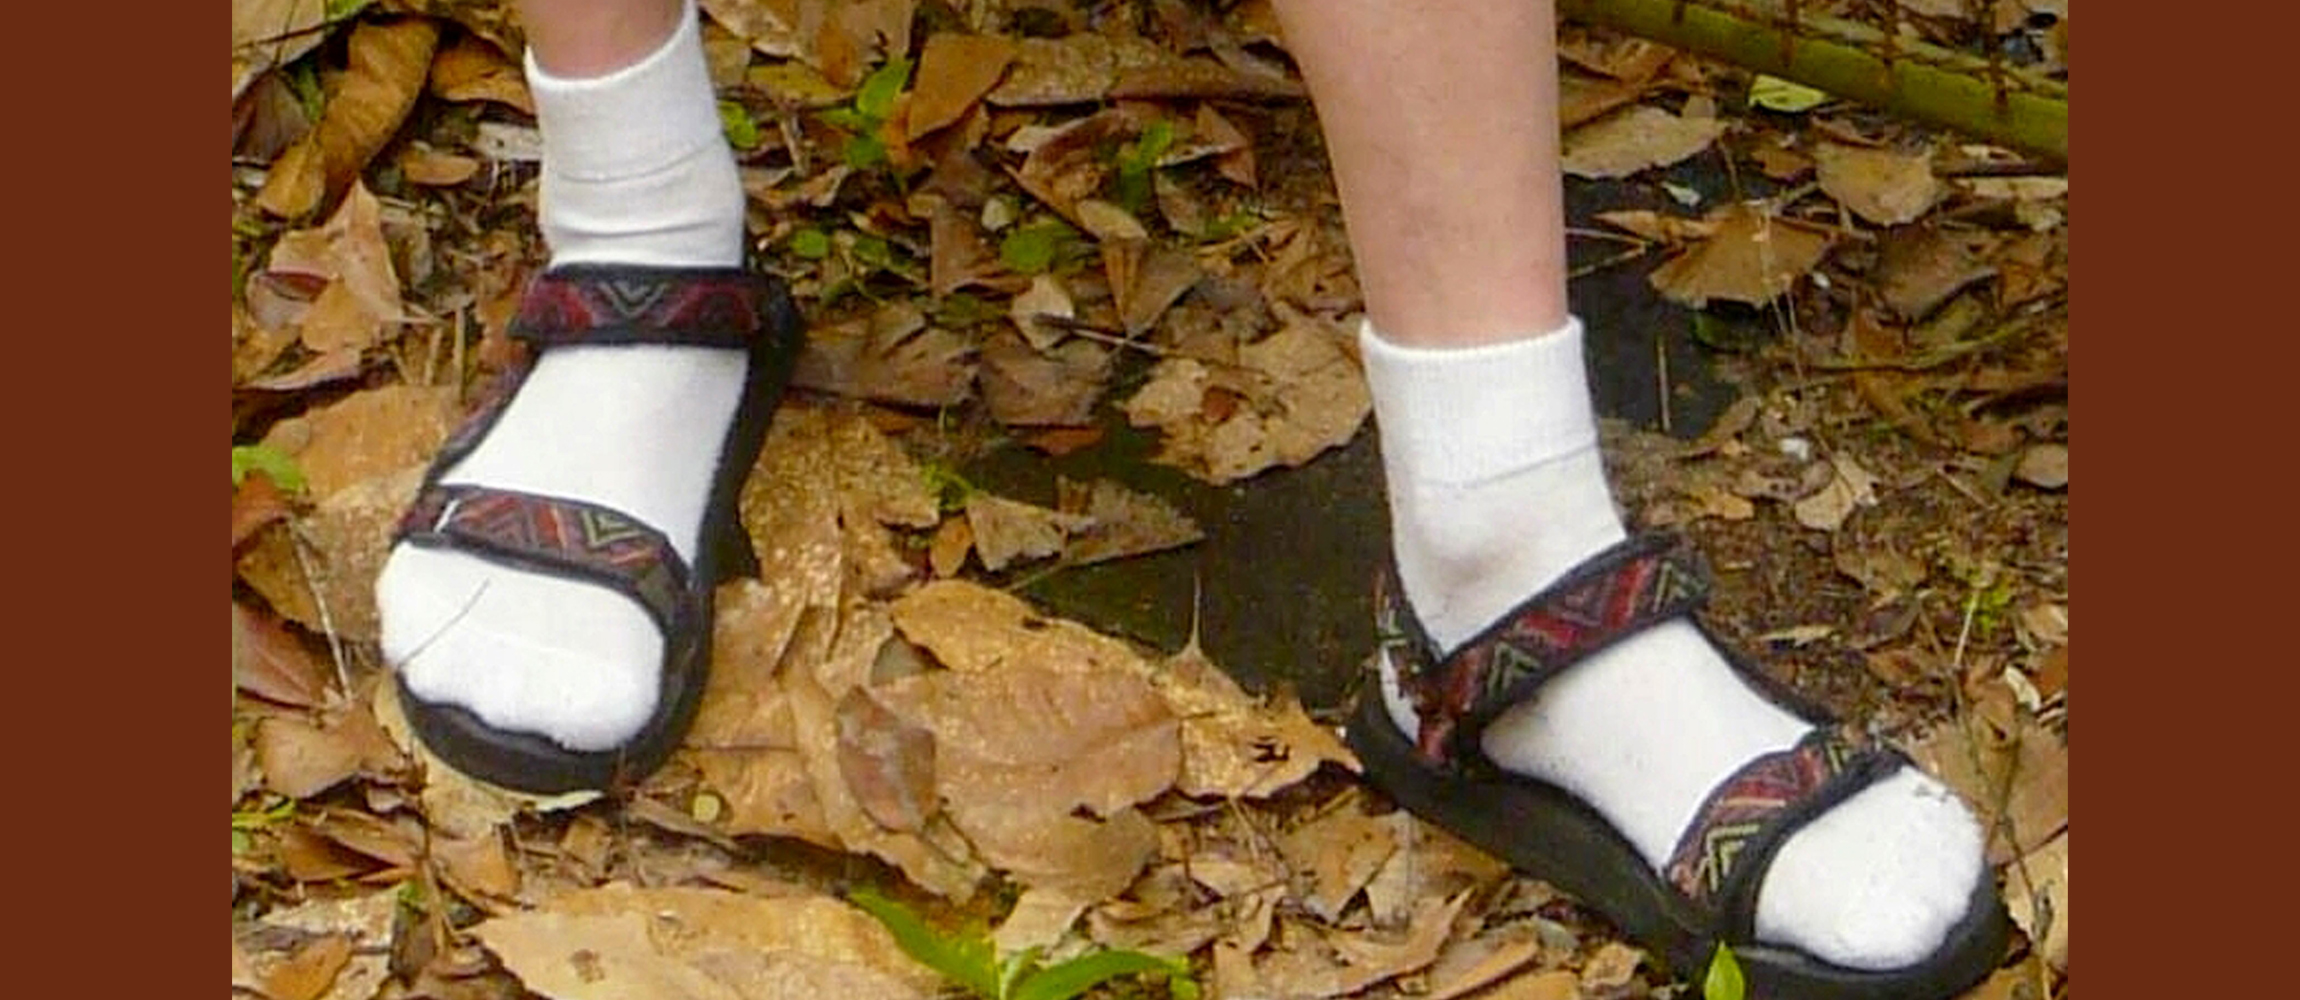 Socks and Sandals © Wiki Creative Commons